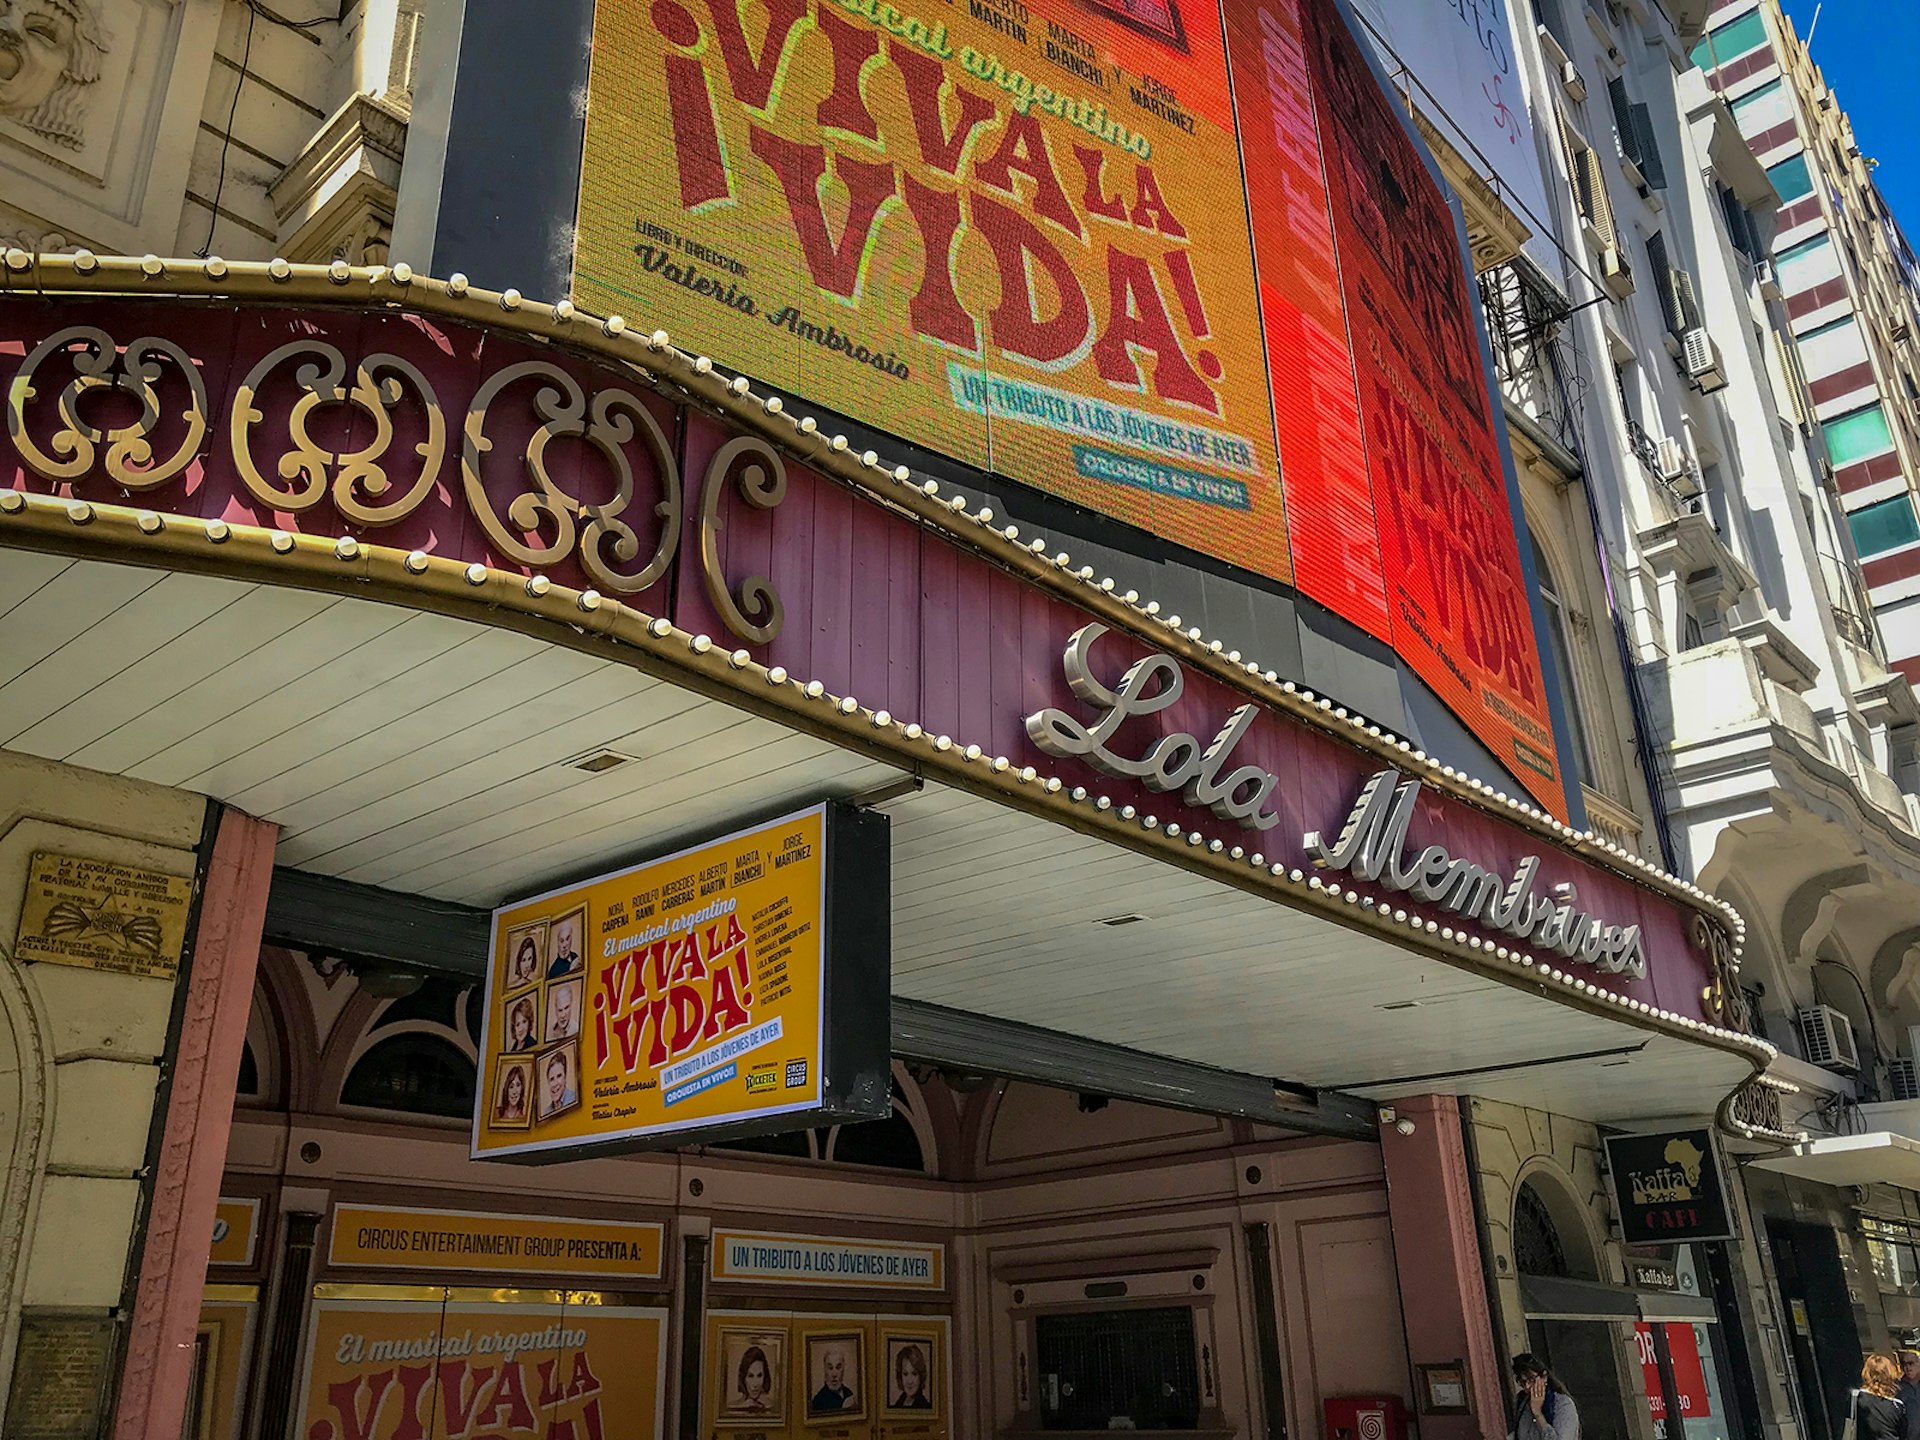 A purple marquee of a theater on Avenida Corrientes with its name written in cursive silver script; above is a billboard advertising a show titled "Viva la Vida" 